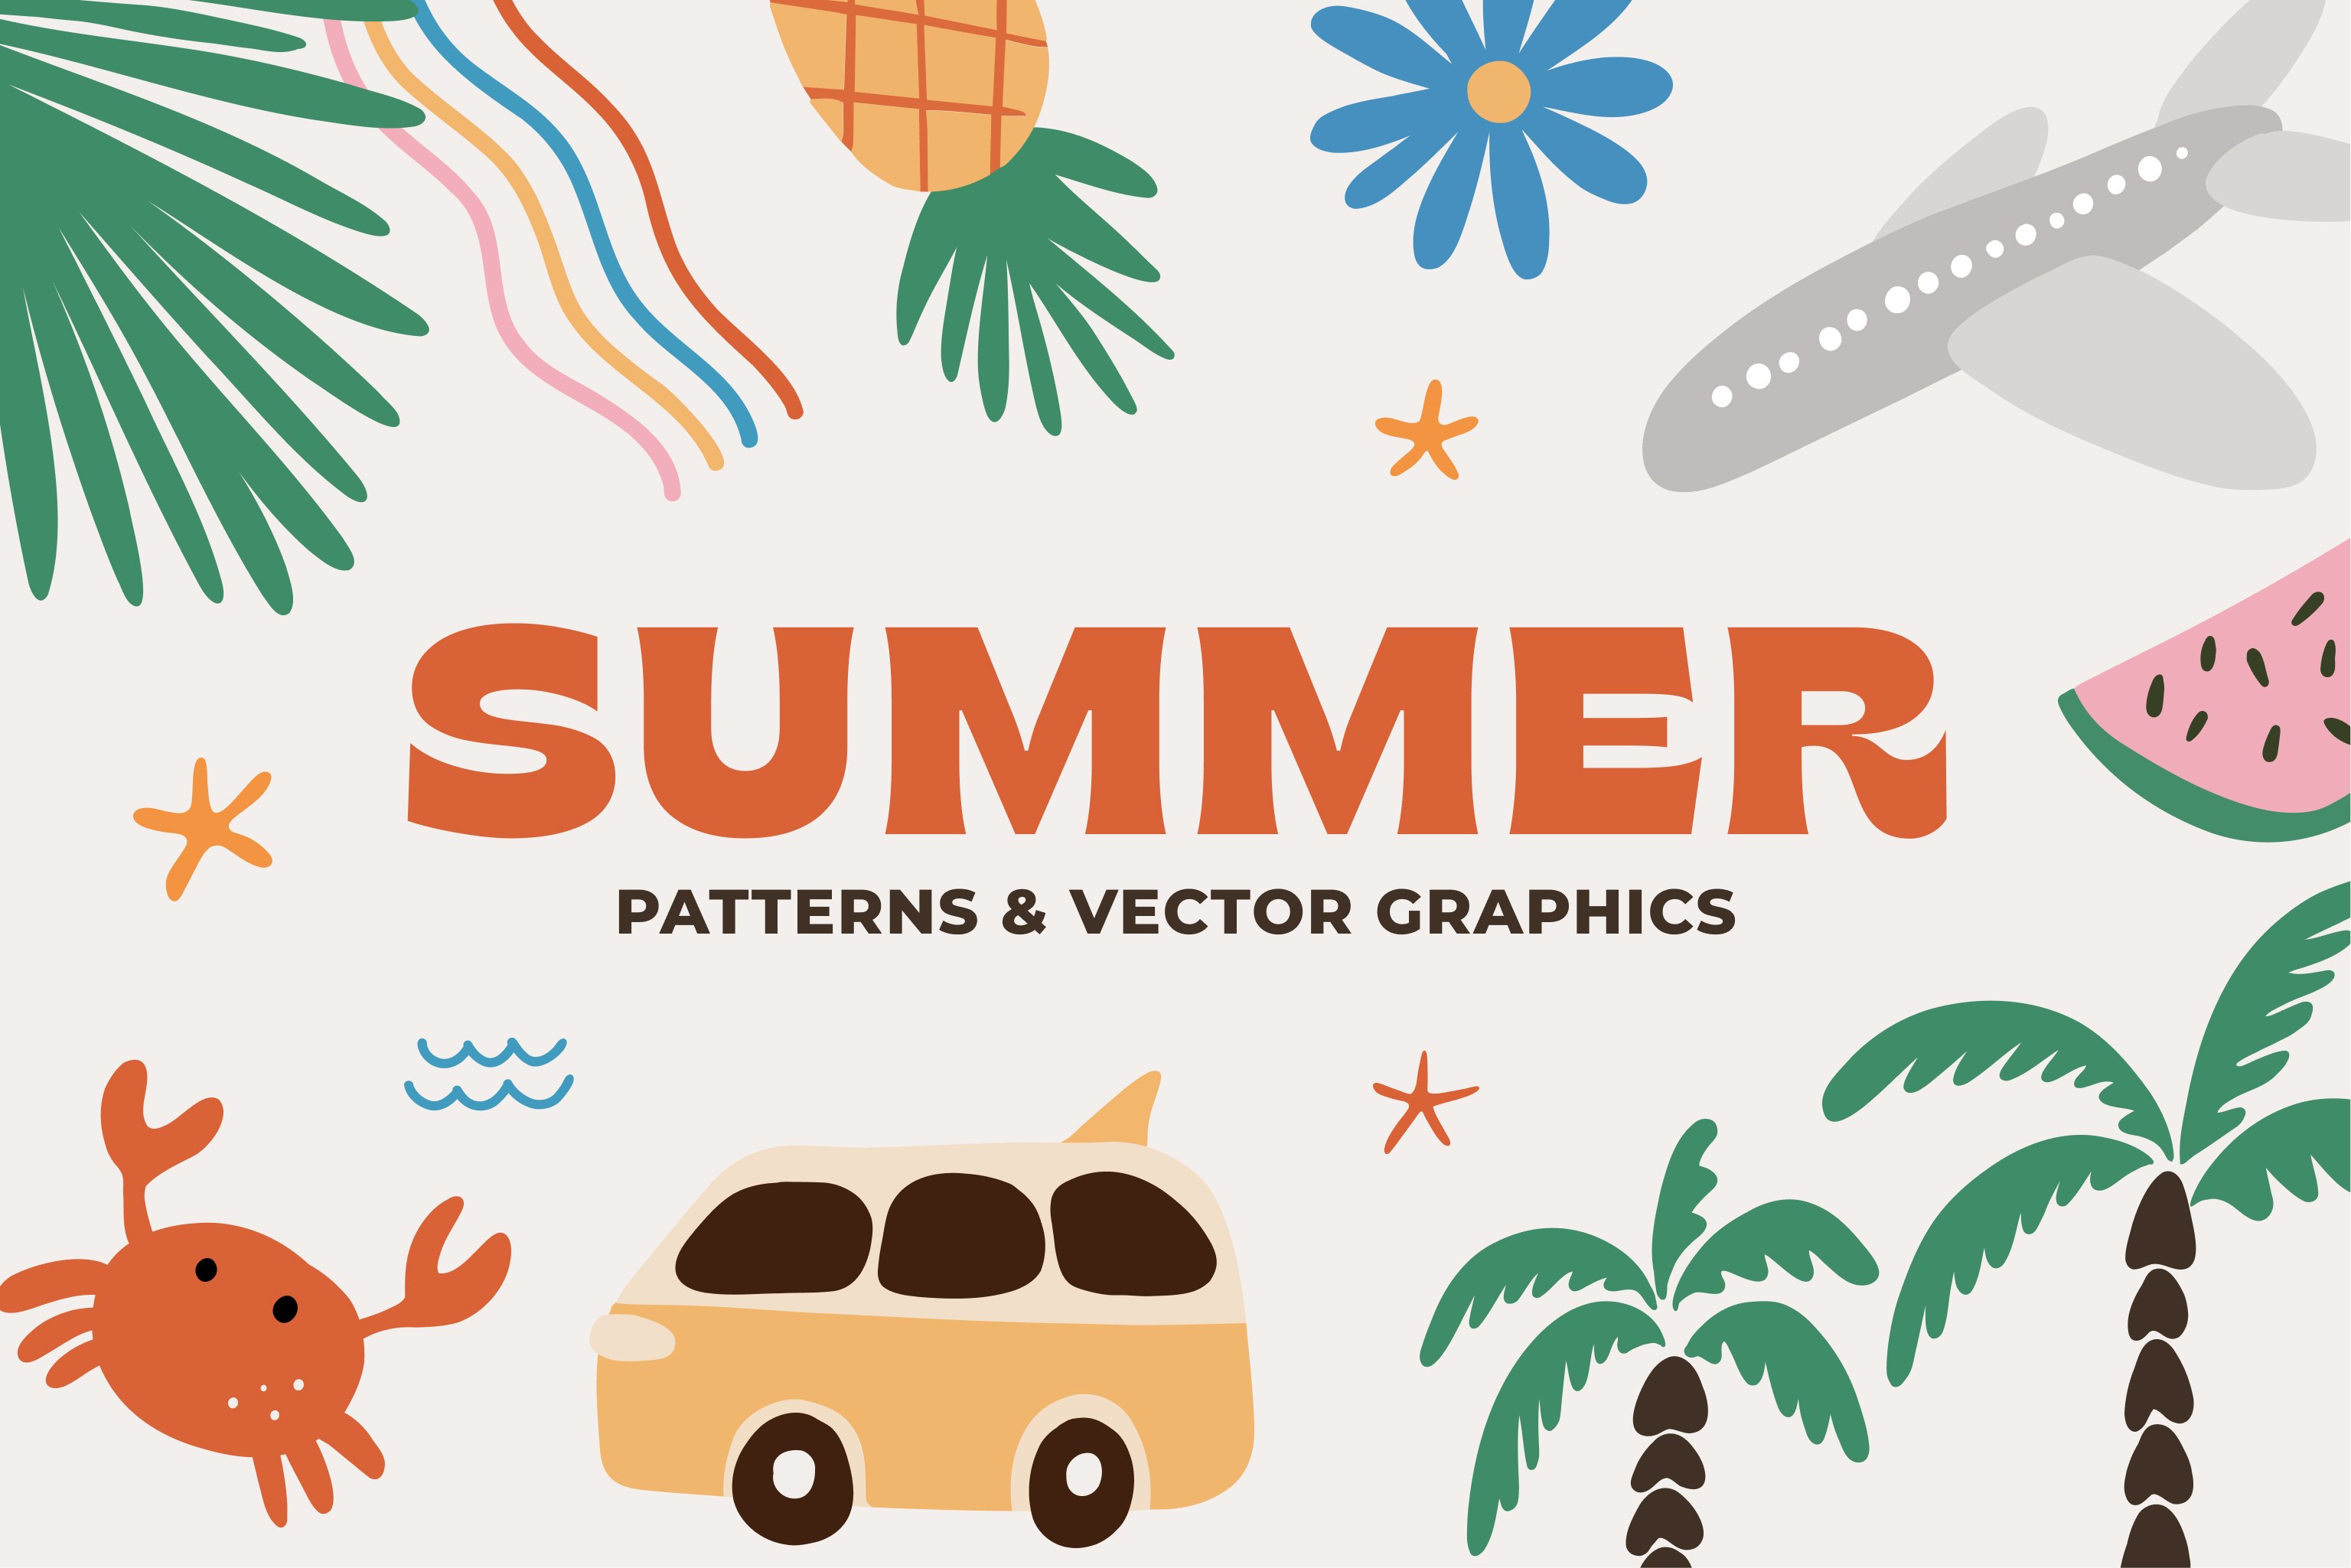 SUMMER patterns & graphics cover image.